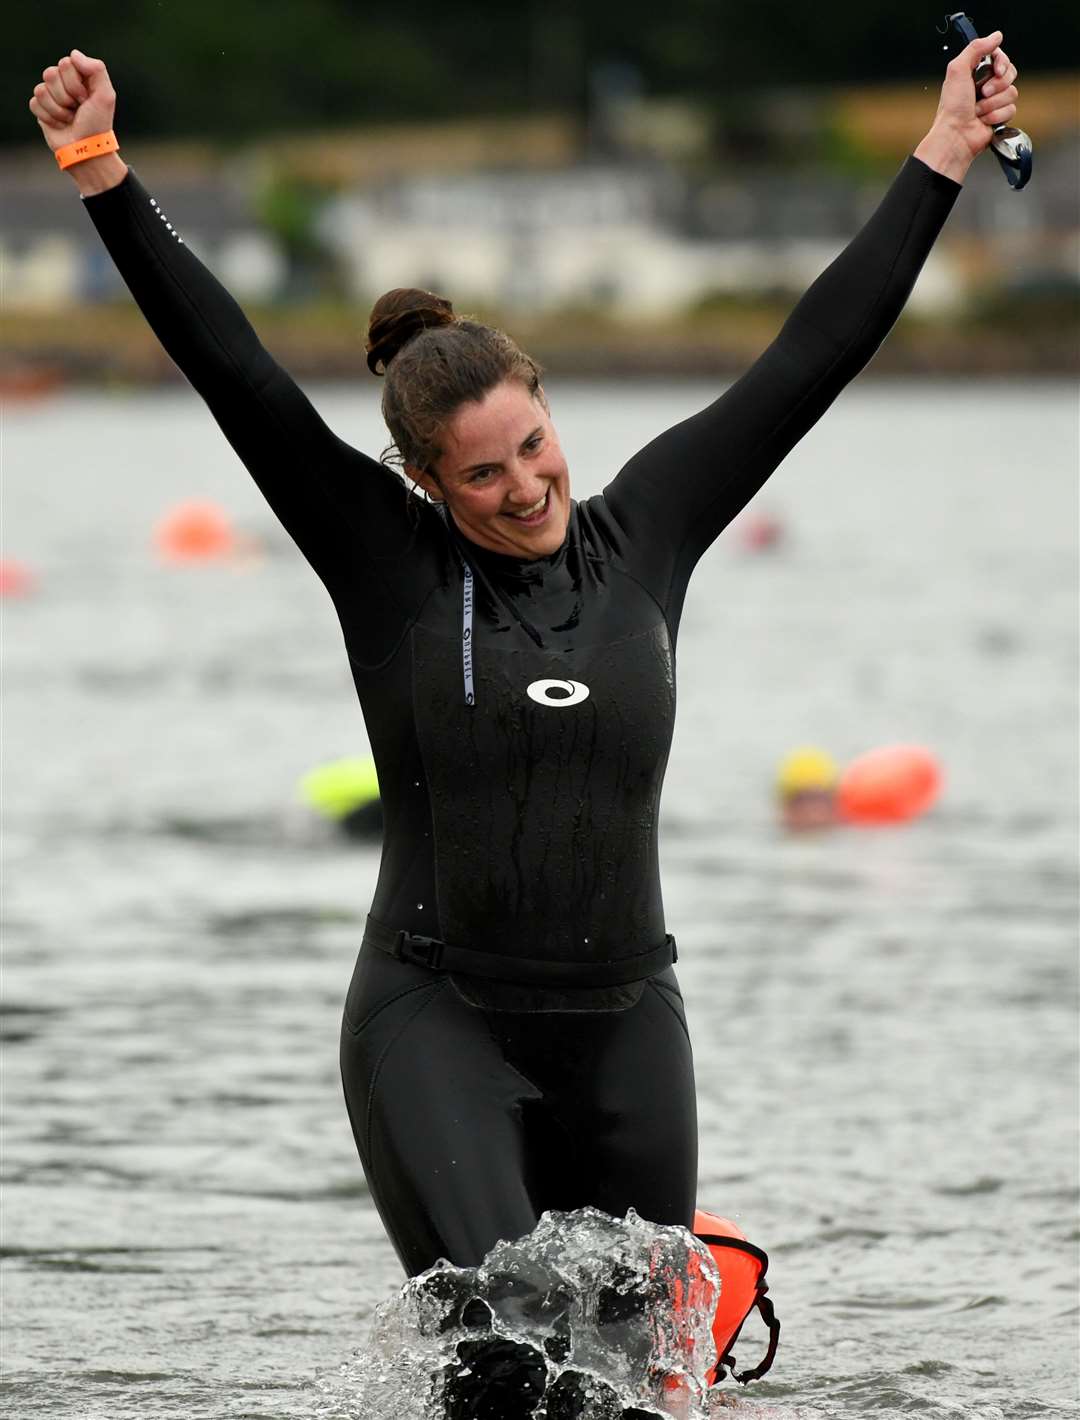 One woman celebrates completing the swimming challenge. Picture: James Mackenzie